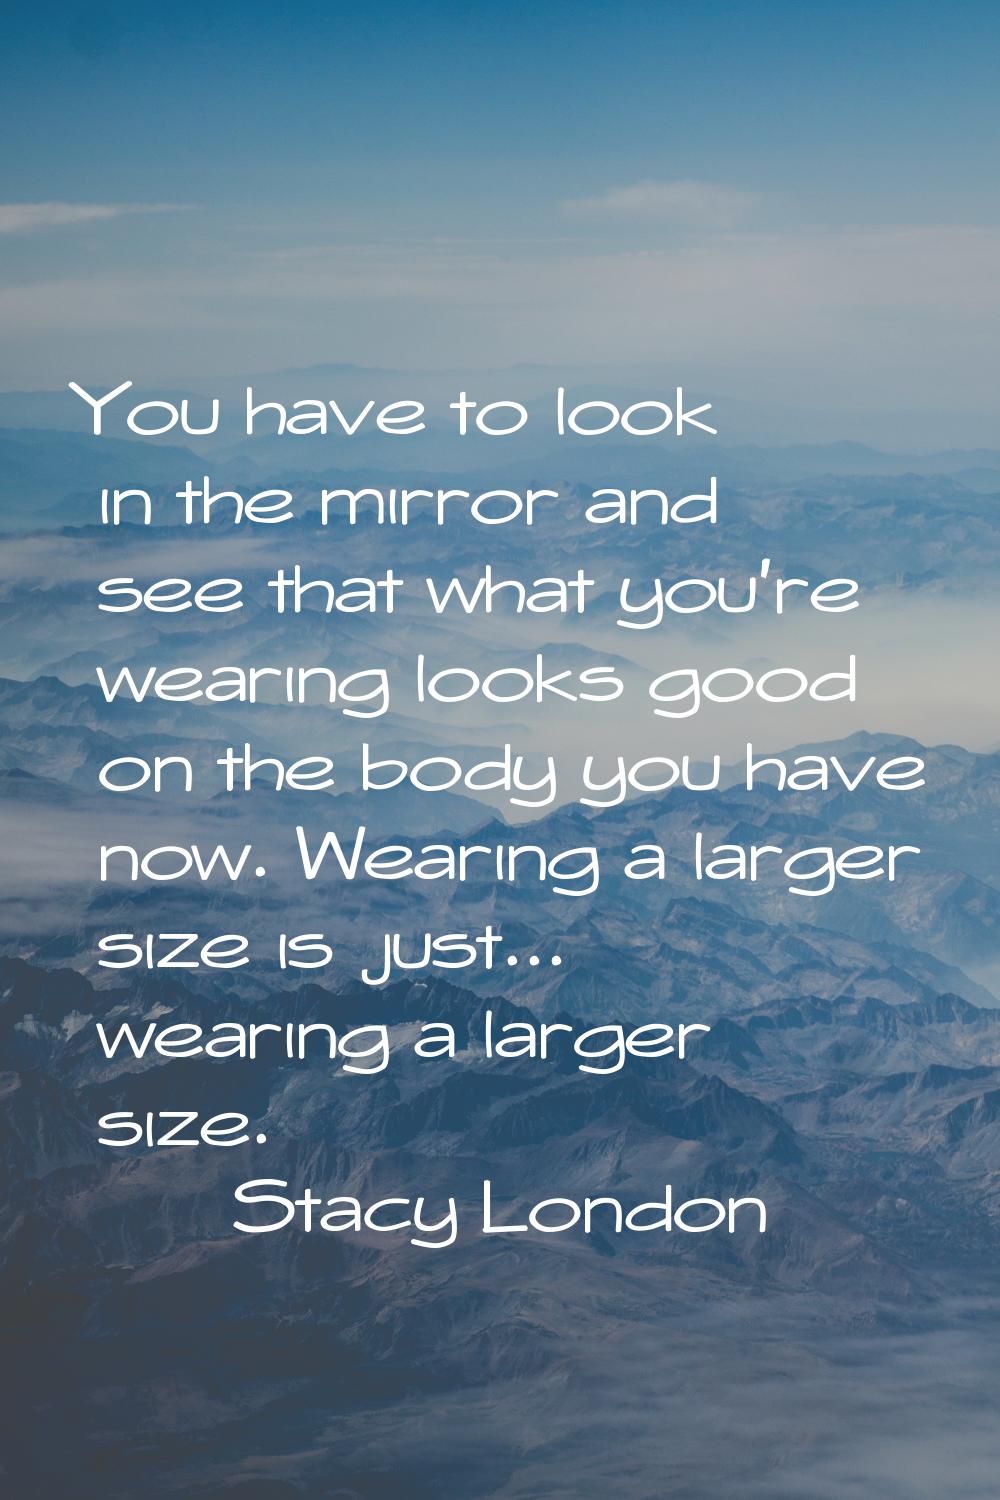 You have to look in the mirror and see that what you're wearing looks good on the body you have now